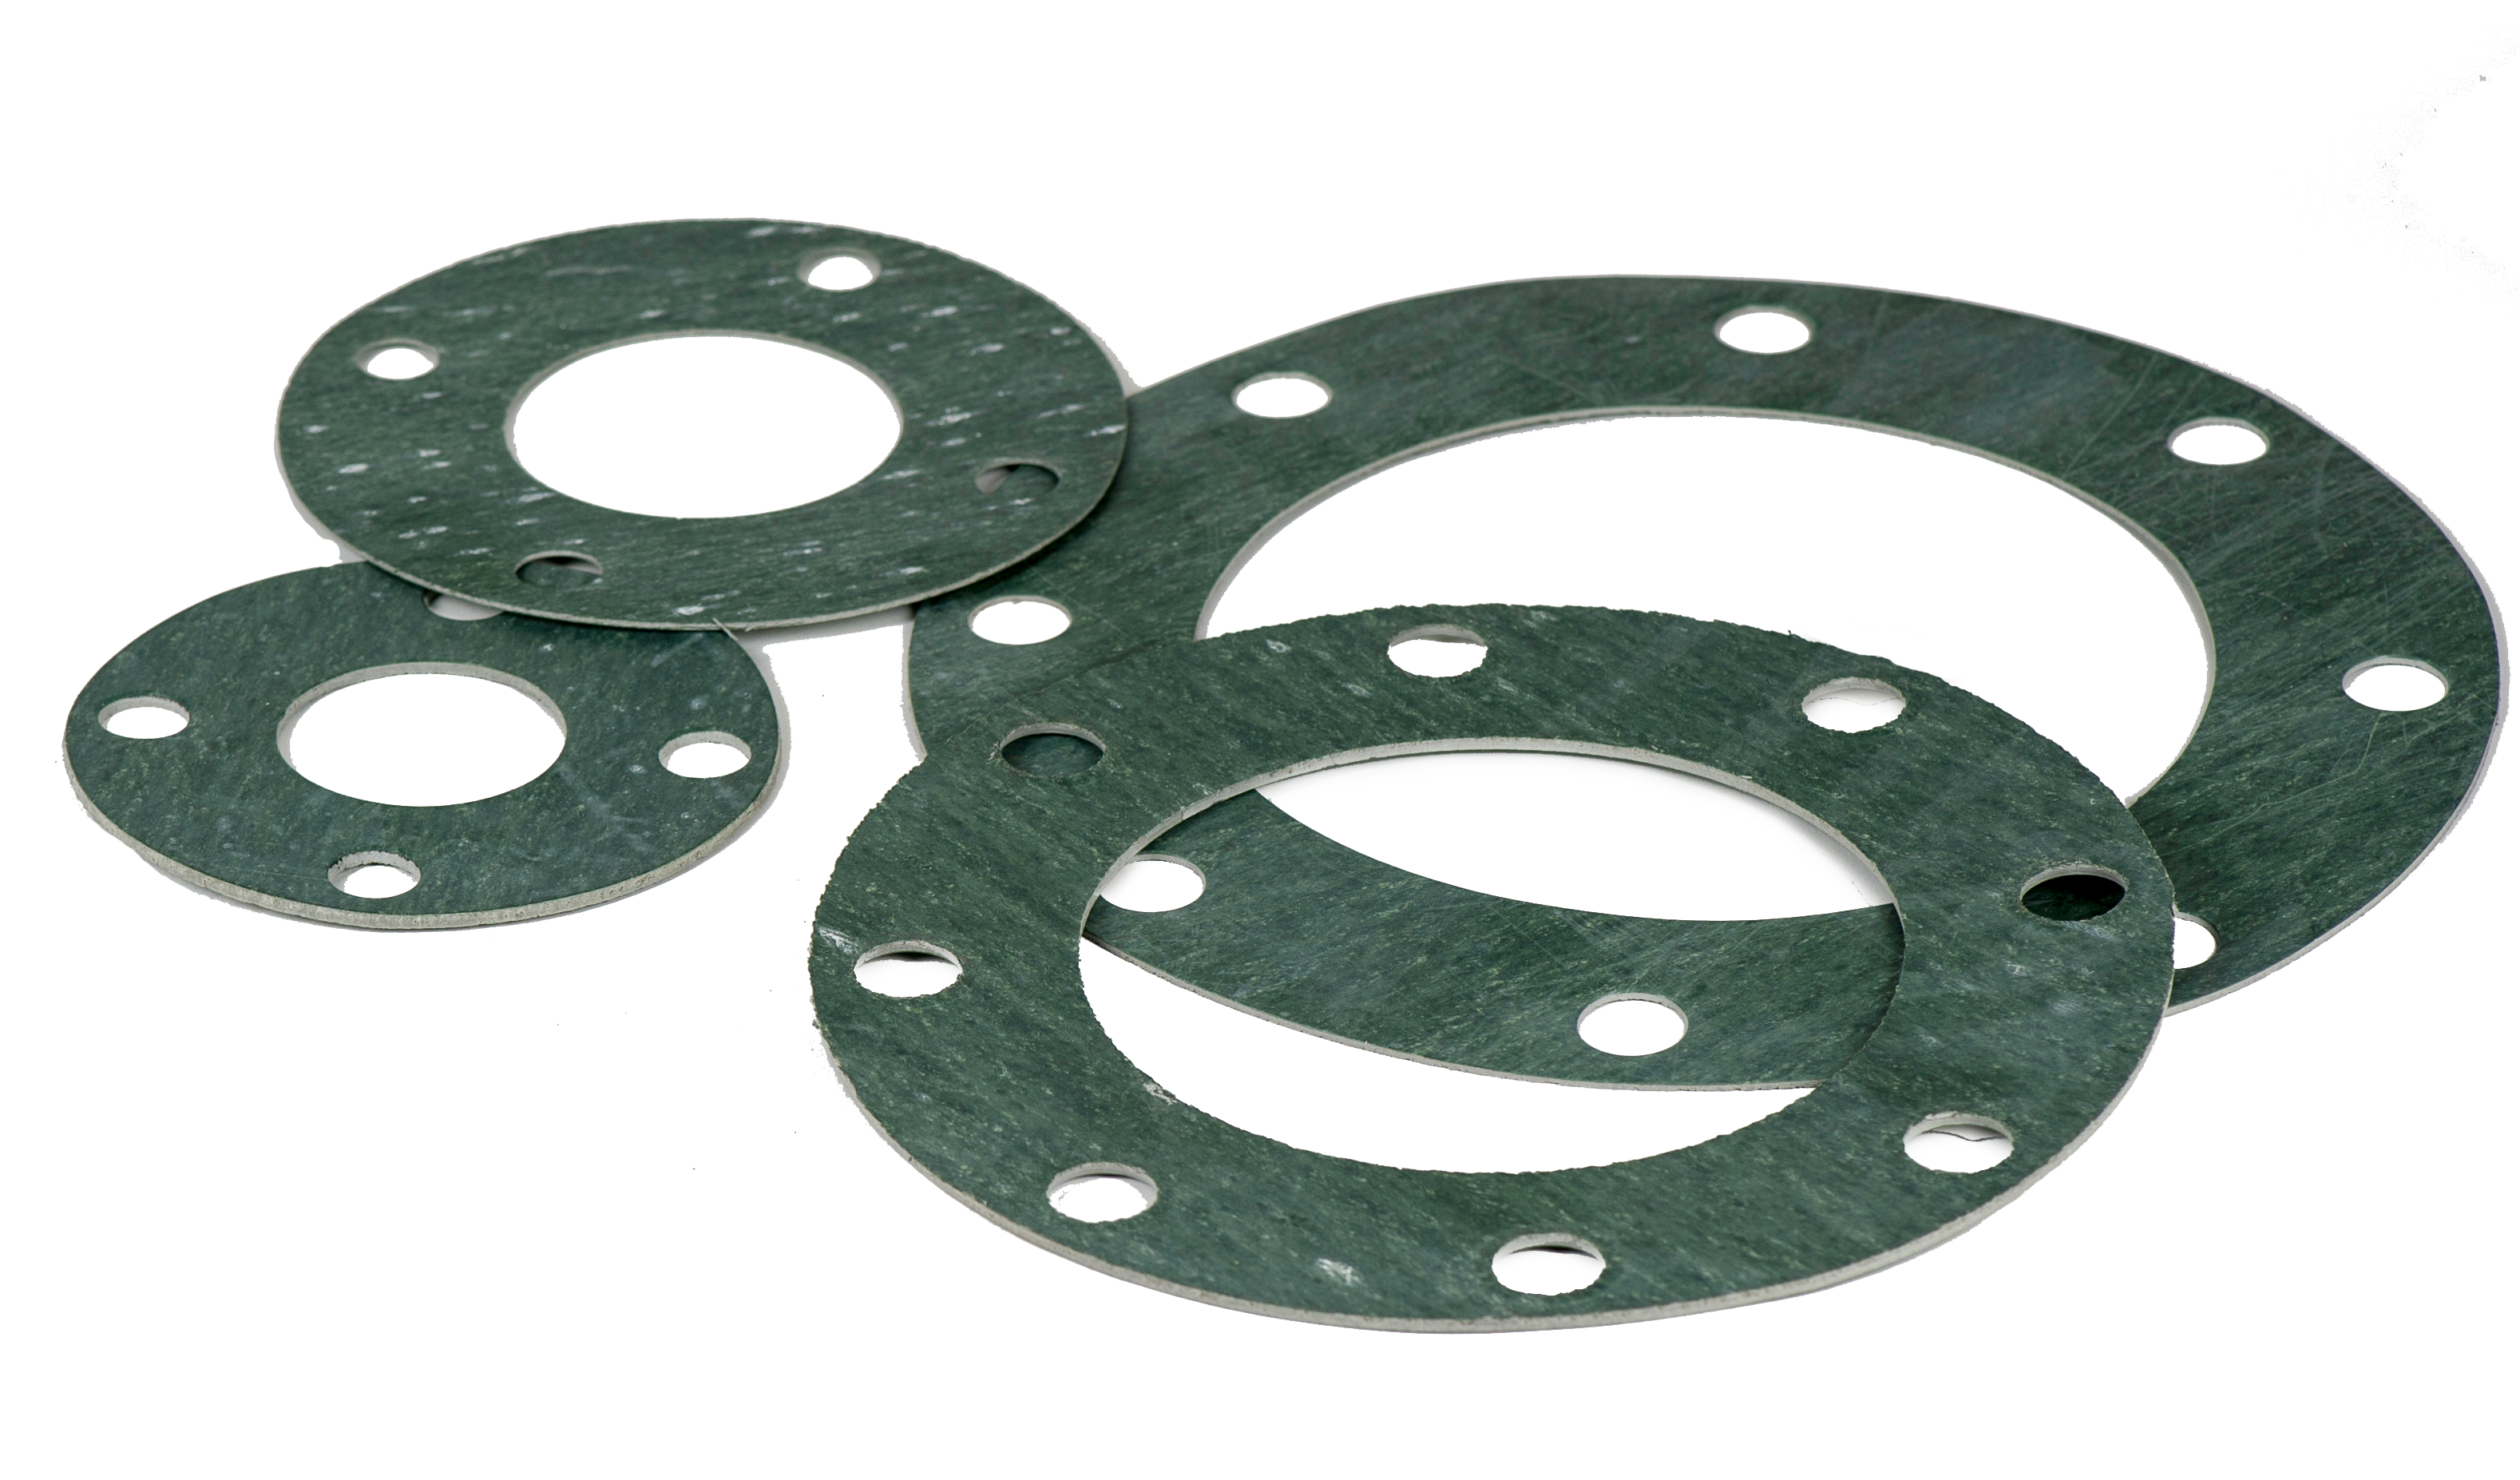 18 Pipe Size 1/16 Thick of NJ Pack of 20 Sterling Seal CFF7106.1800.062.300X20 7106 60 Durometer Full Face Gasket 18 ID Pressure Class 300# Neoprene Rubber 18 ID 18 Pipe Size 1/16 Thick Supplied by Sur-Seal Inc